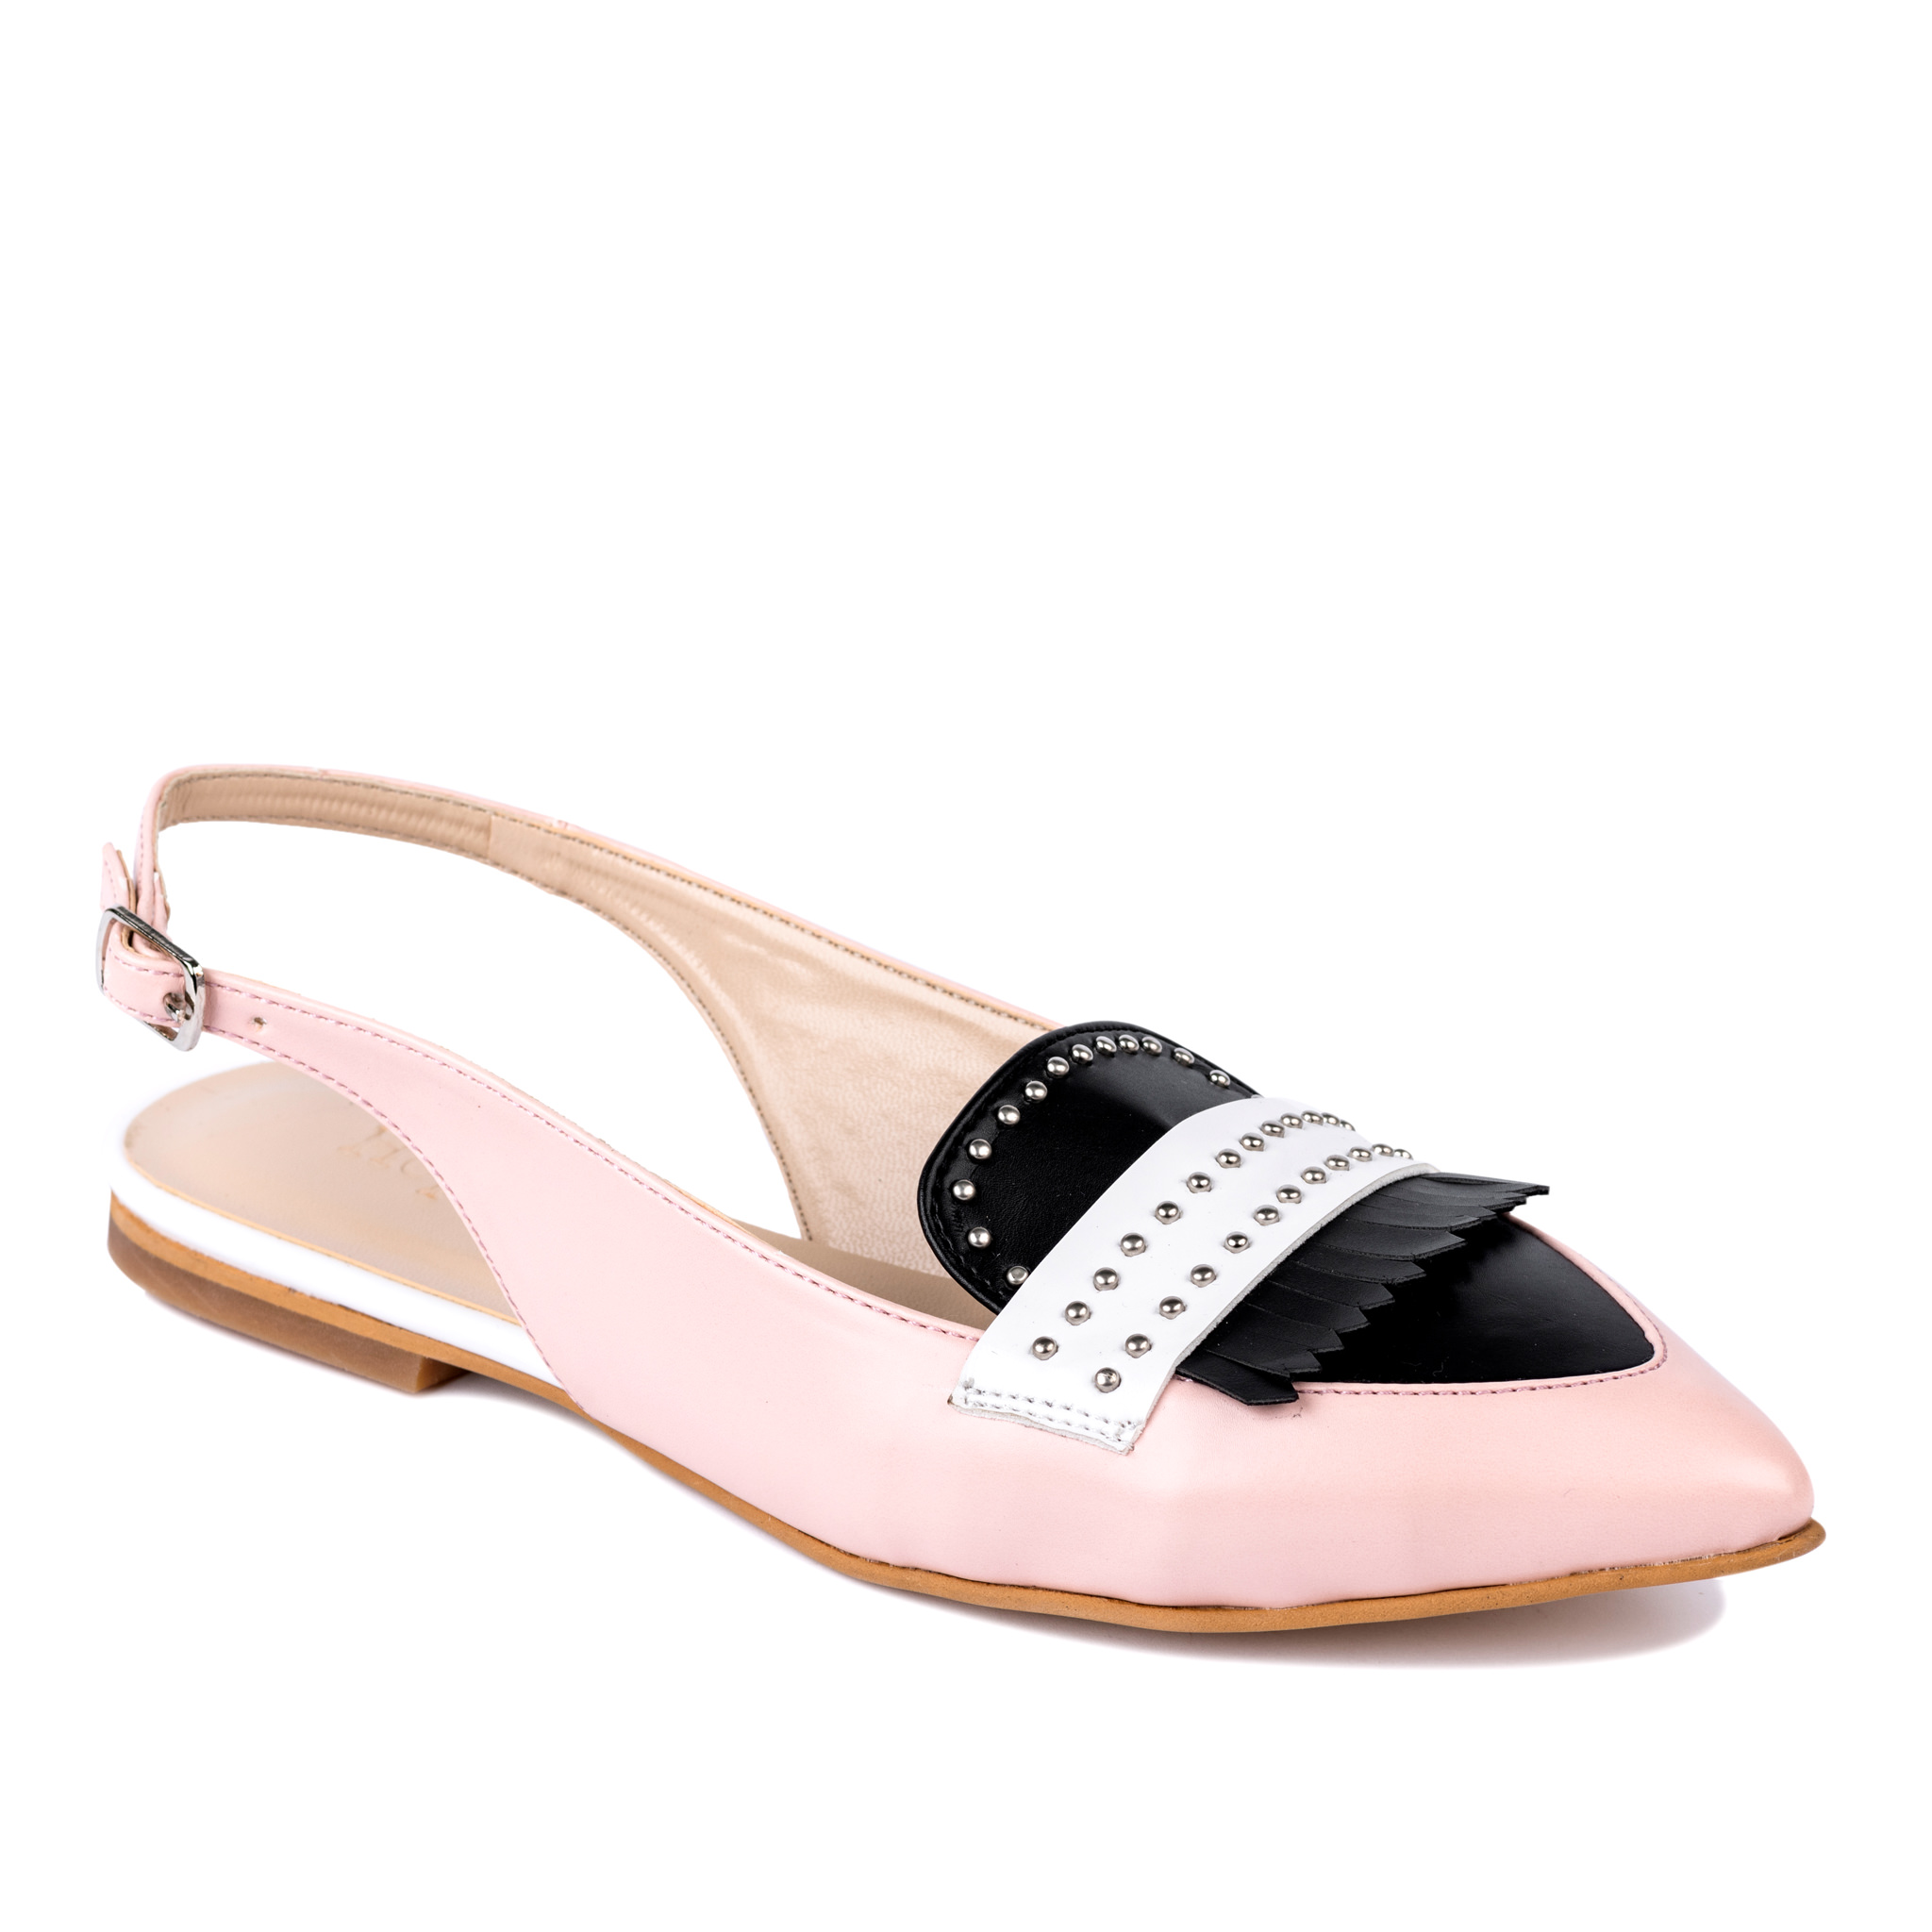 POINTED FLAT SANDALS WITH RIVETS - ROSE